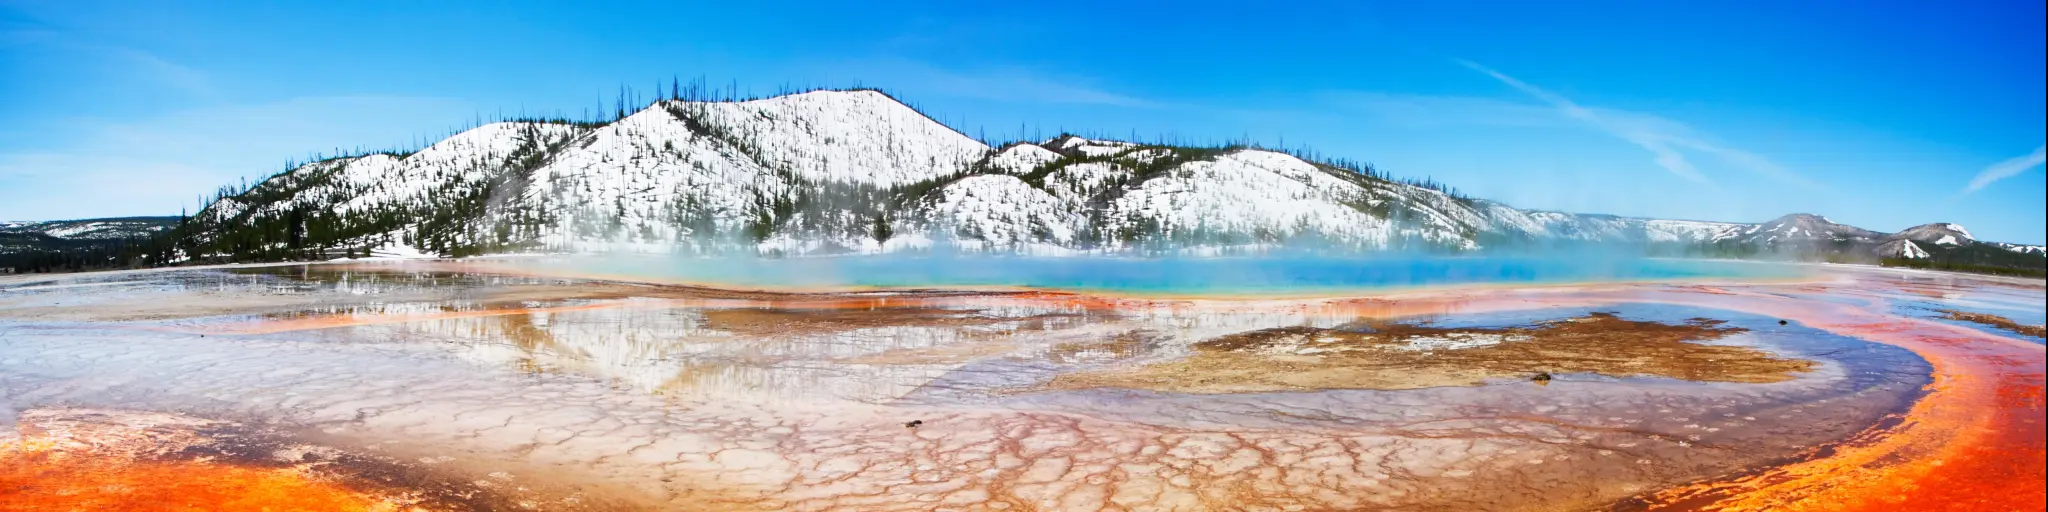 Vibrant colors of the Midway Geyser Basin at Yellowstone National Park, with snowy mountains in the background